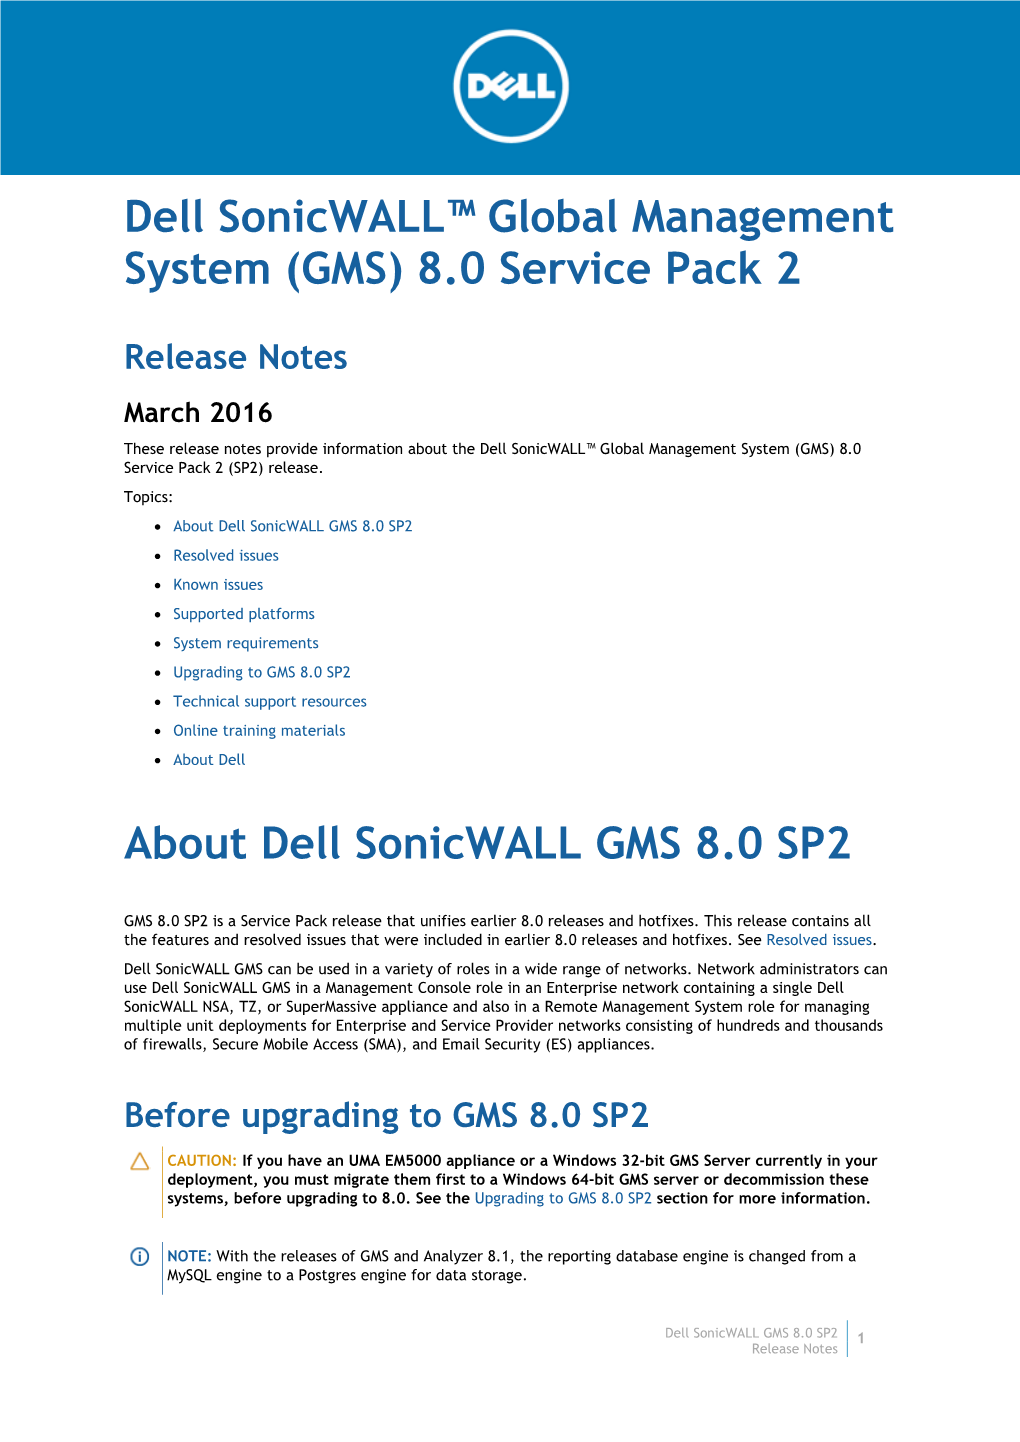 Dell Sonicwall Global Management System 8.0 Service Pack 2 Release